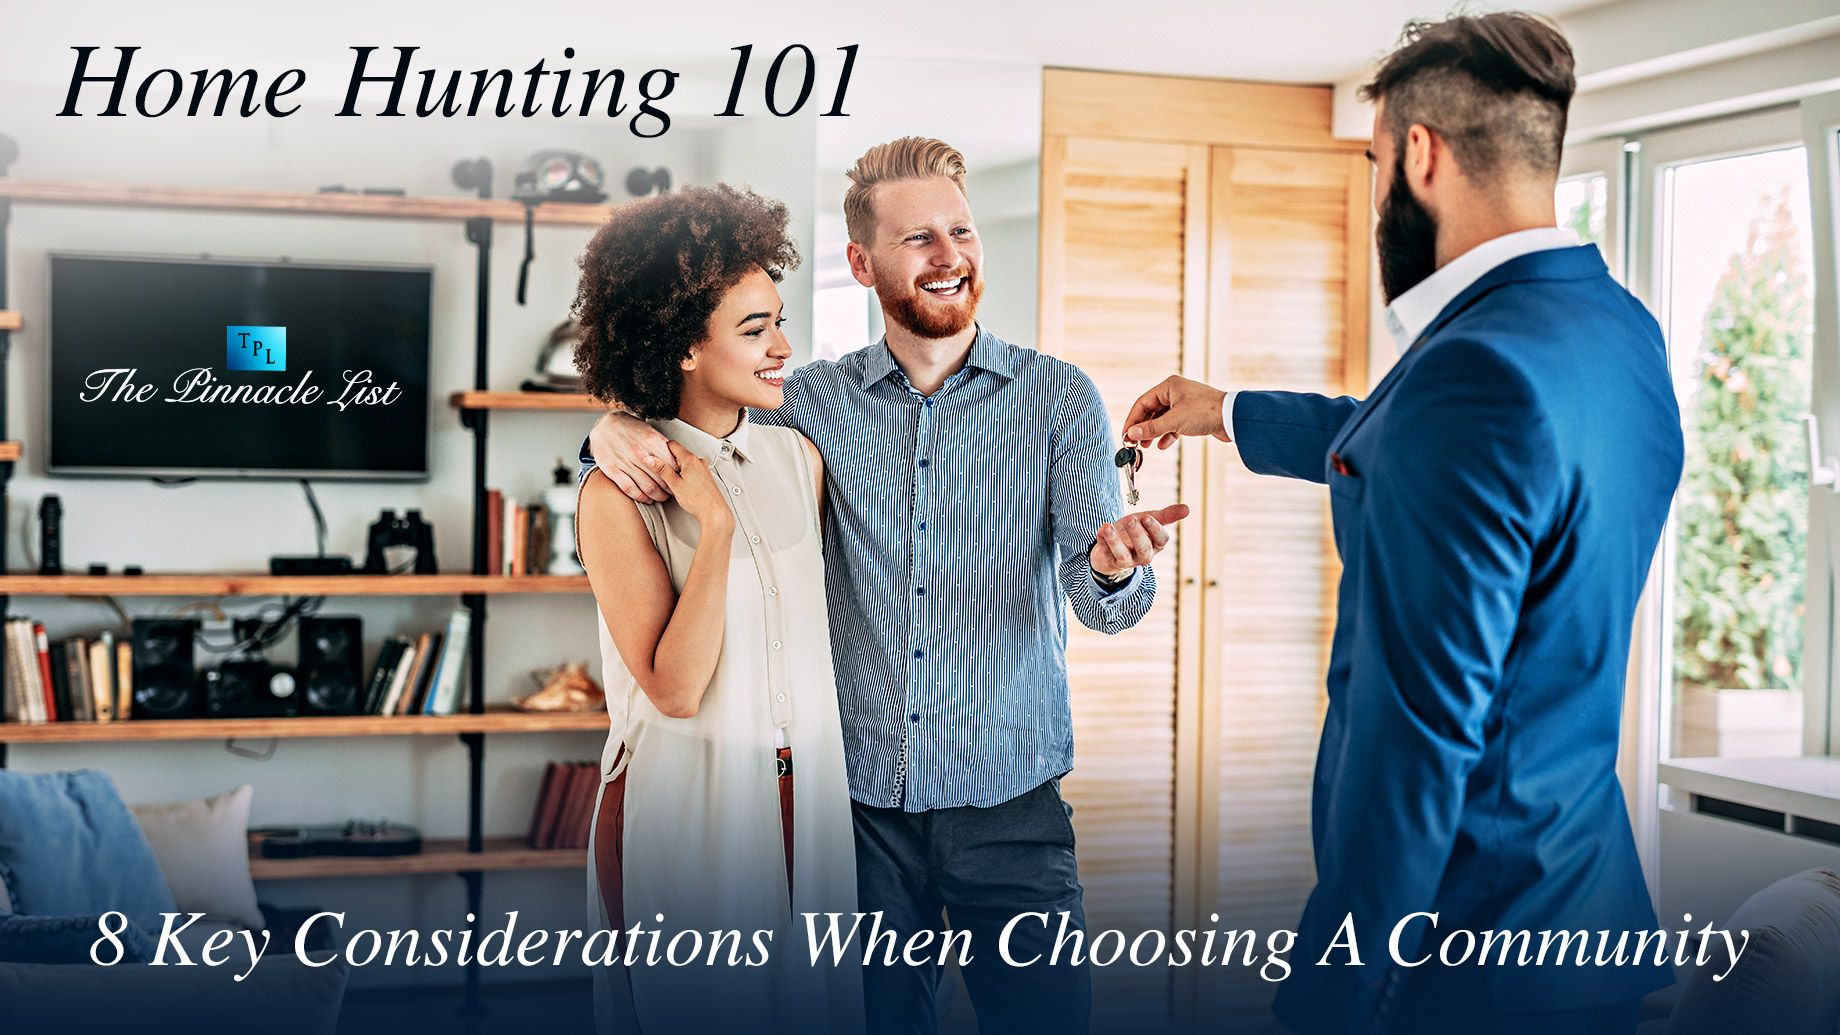 Home Hunting 101 – 8 Key Considerations When Choosing A Community